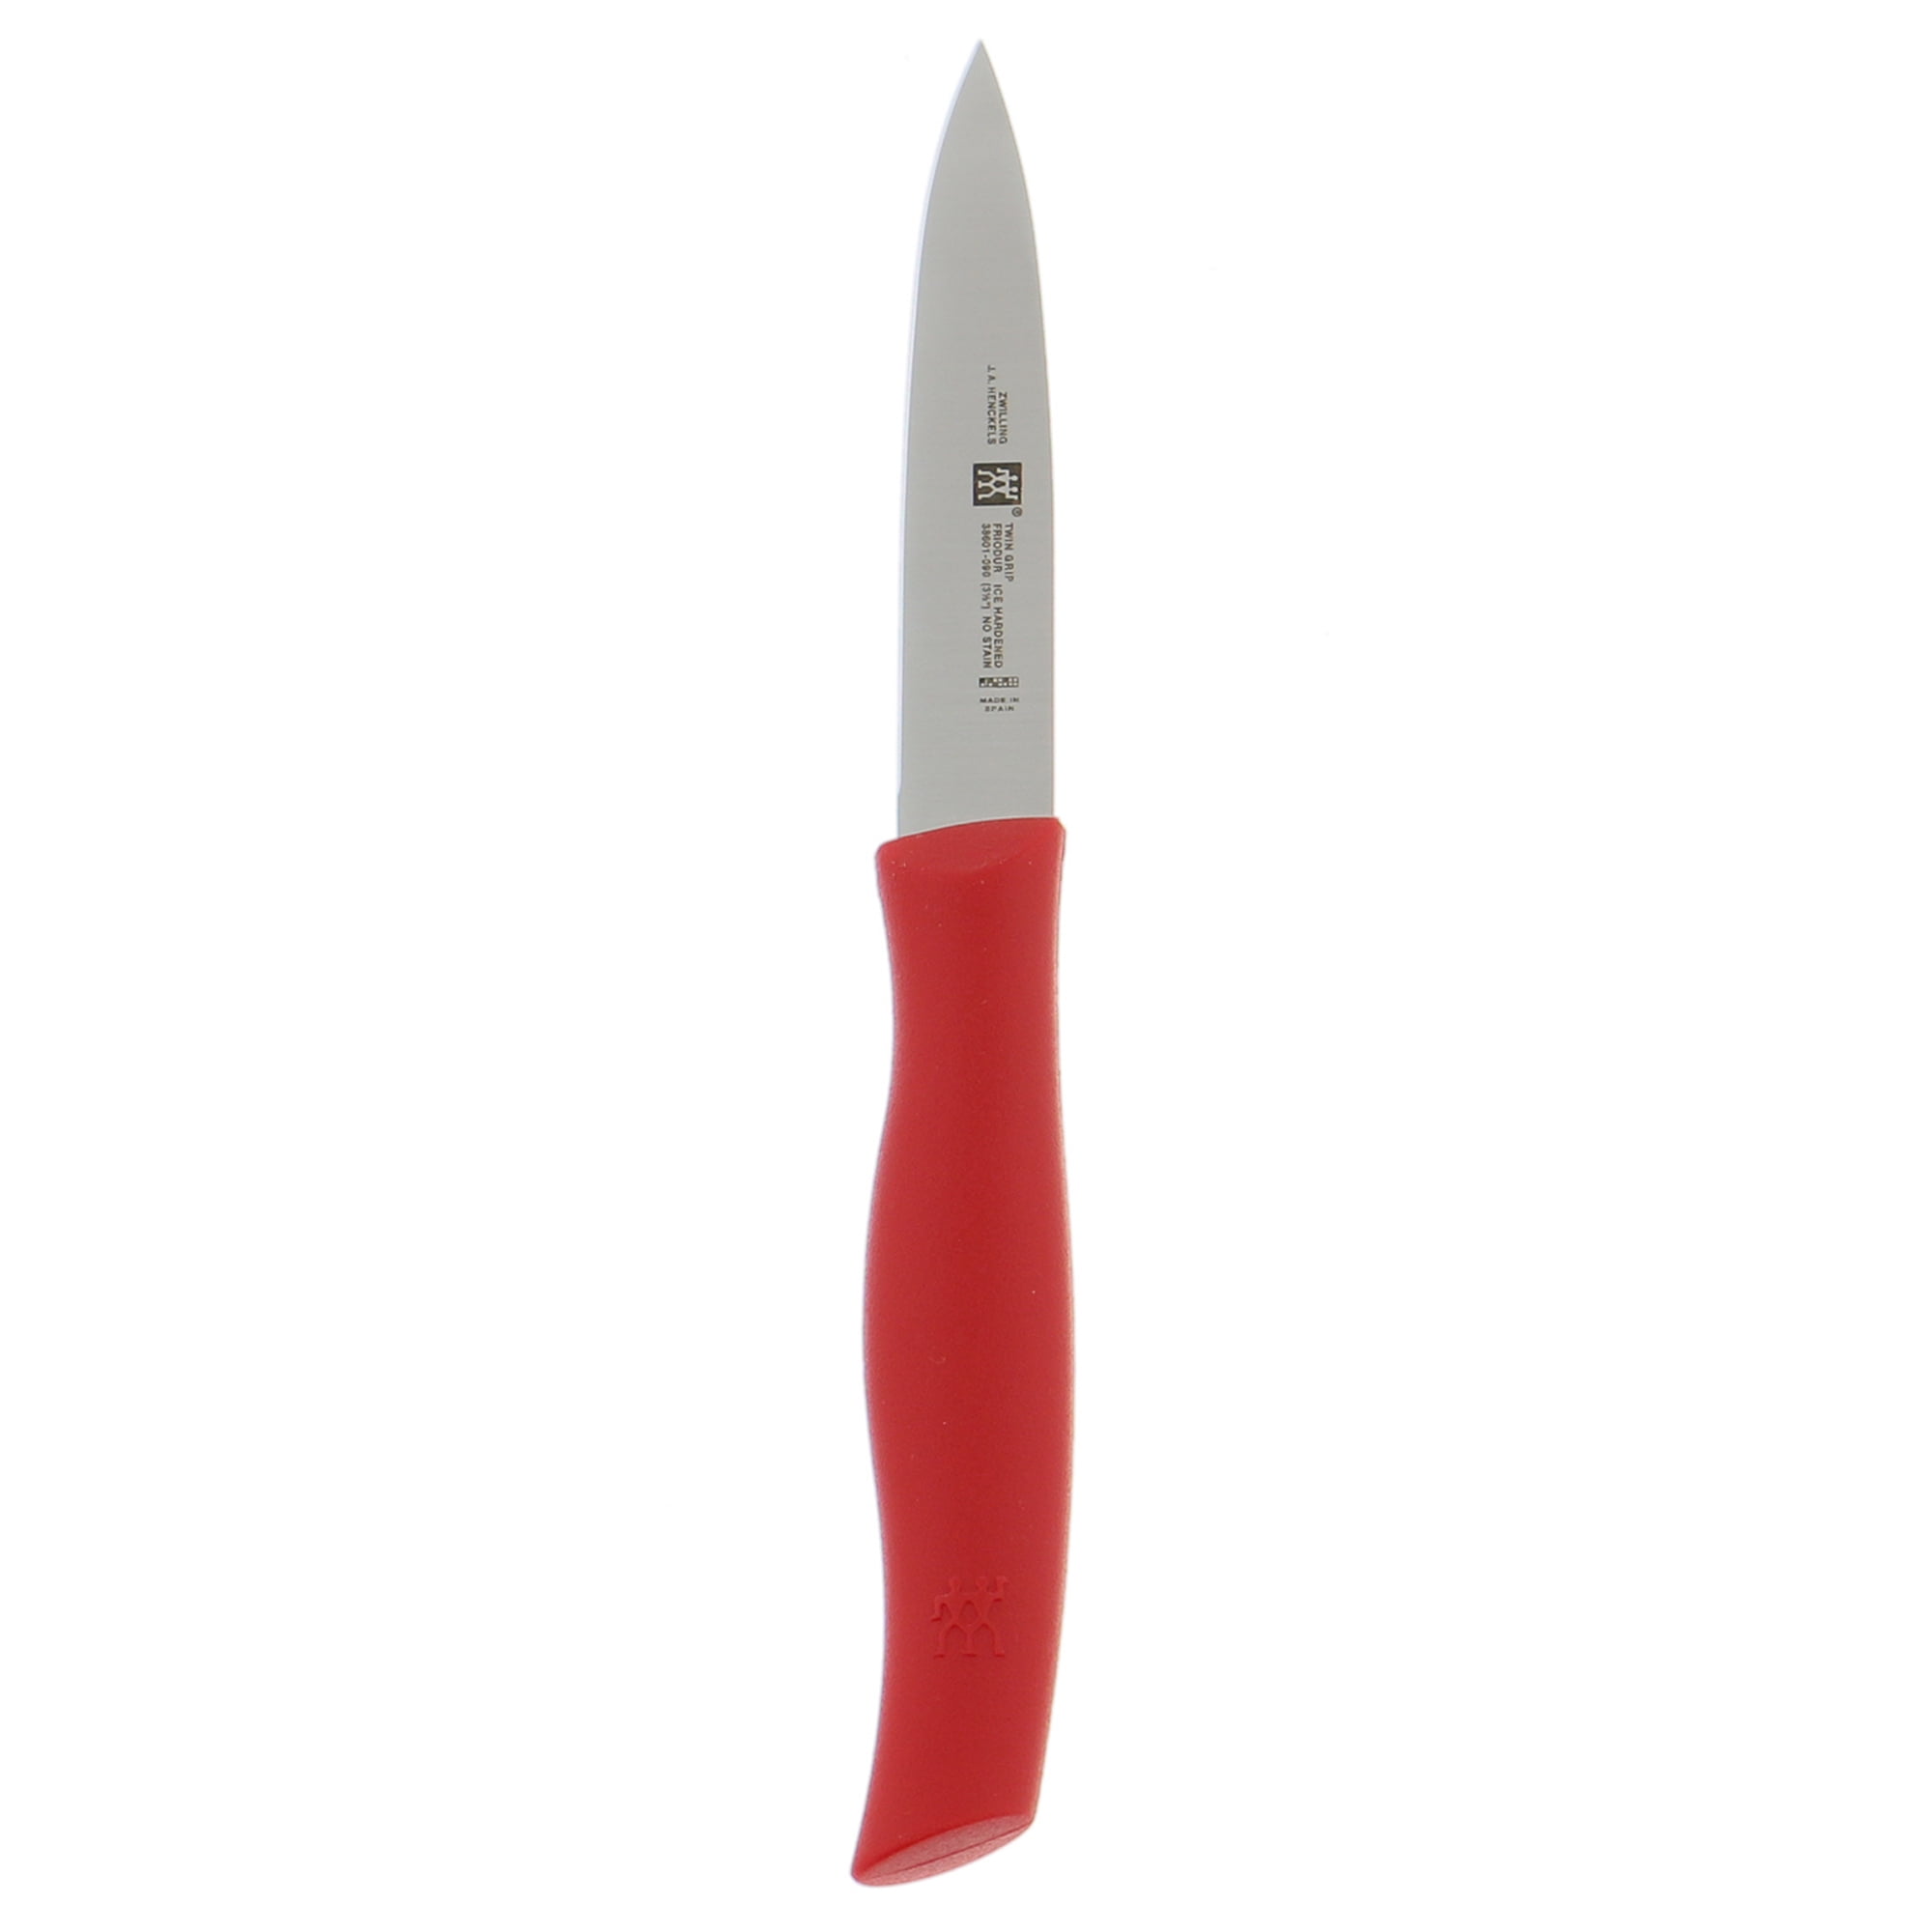 Zyliss 31300 Paring Knife With Cover, 3.25 in - Win Depot